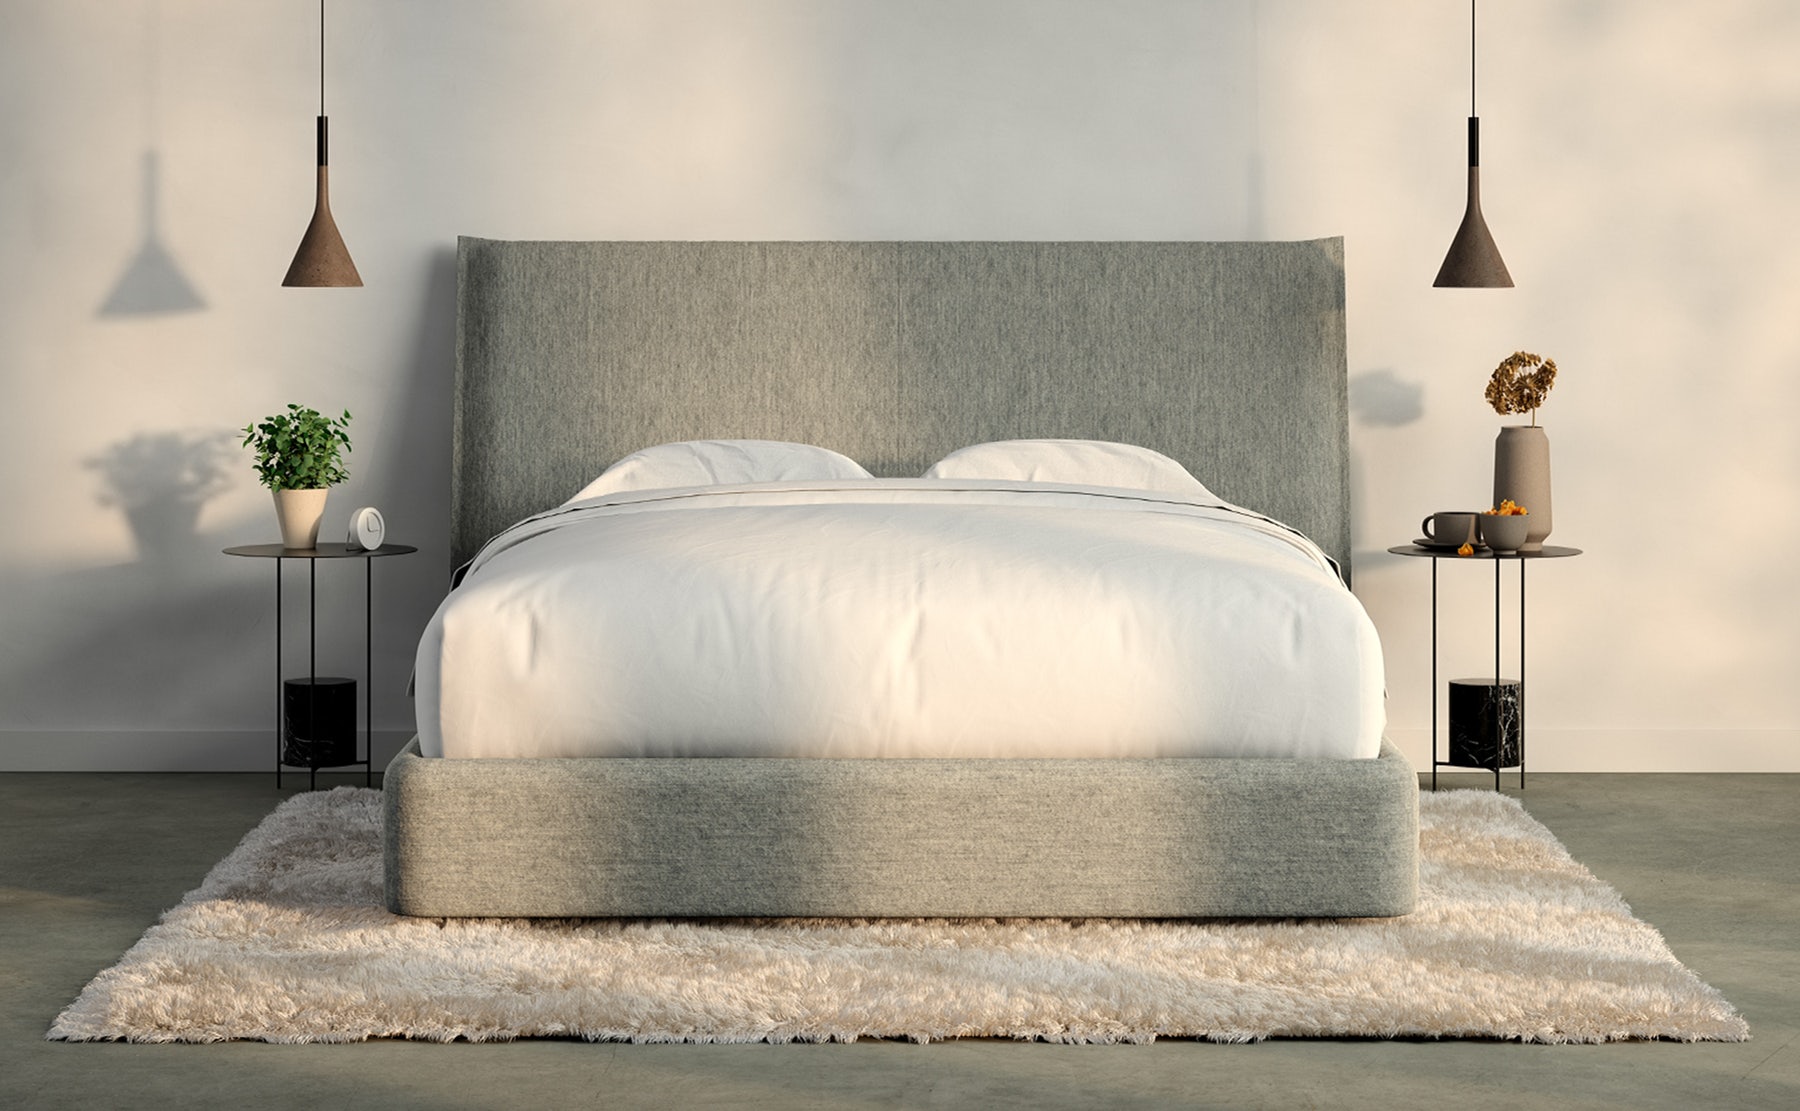 Mattress Sizes And Bed Dimensions Guide, Are King Beds Wider Or Longer